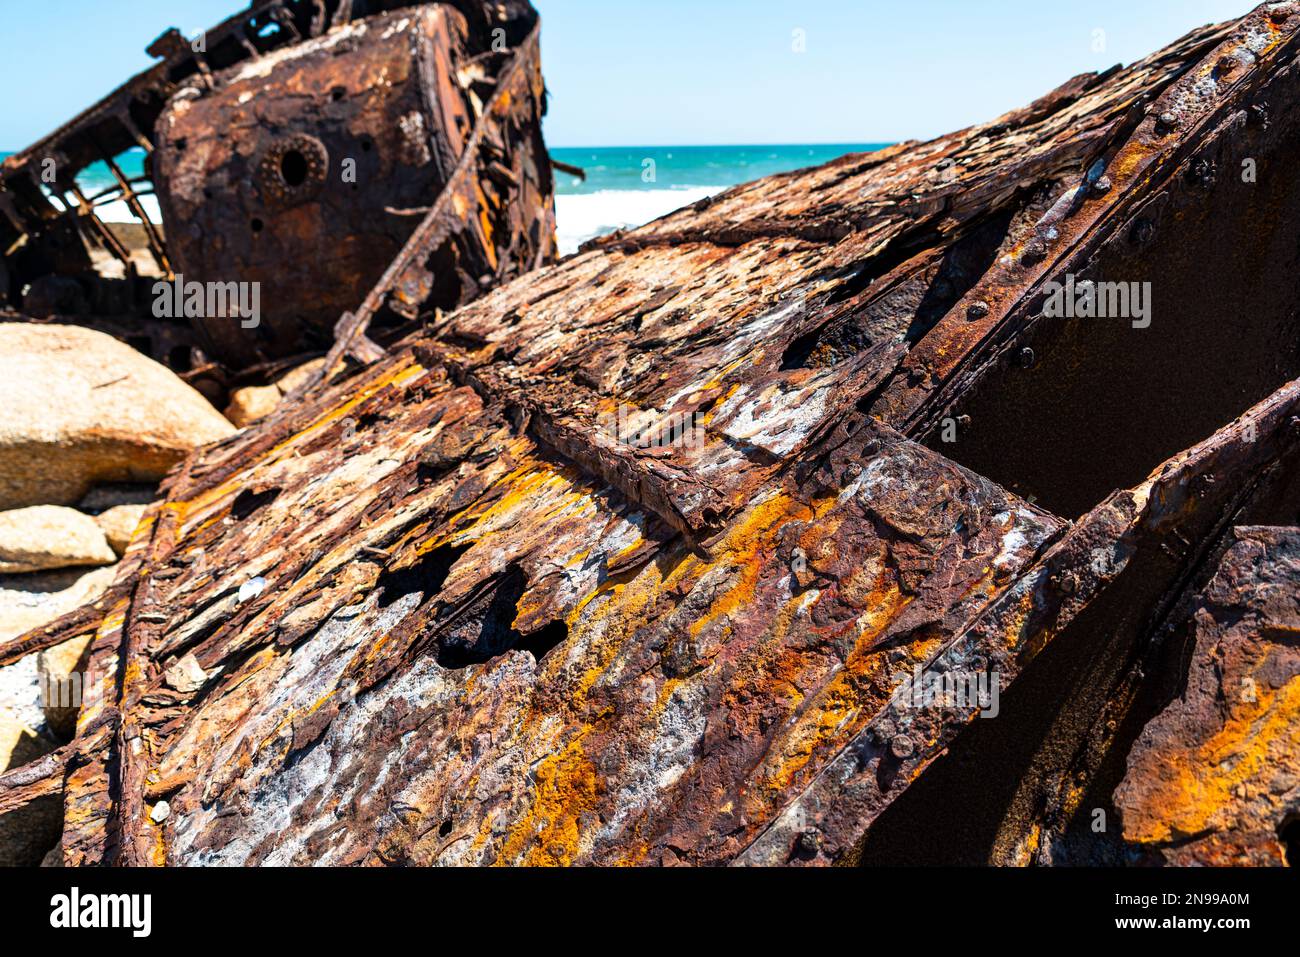 The wreck of the Aristea lies on the rocks on the Atlantic Ocean coast near Hondeklip Bay in South Africa. The ship ran aground in 1945 and corrodes. Stock Photo